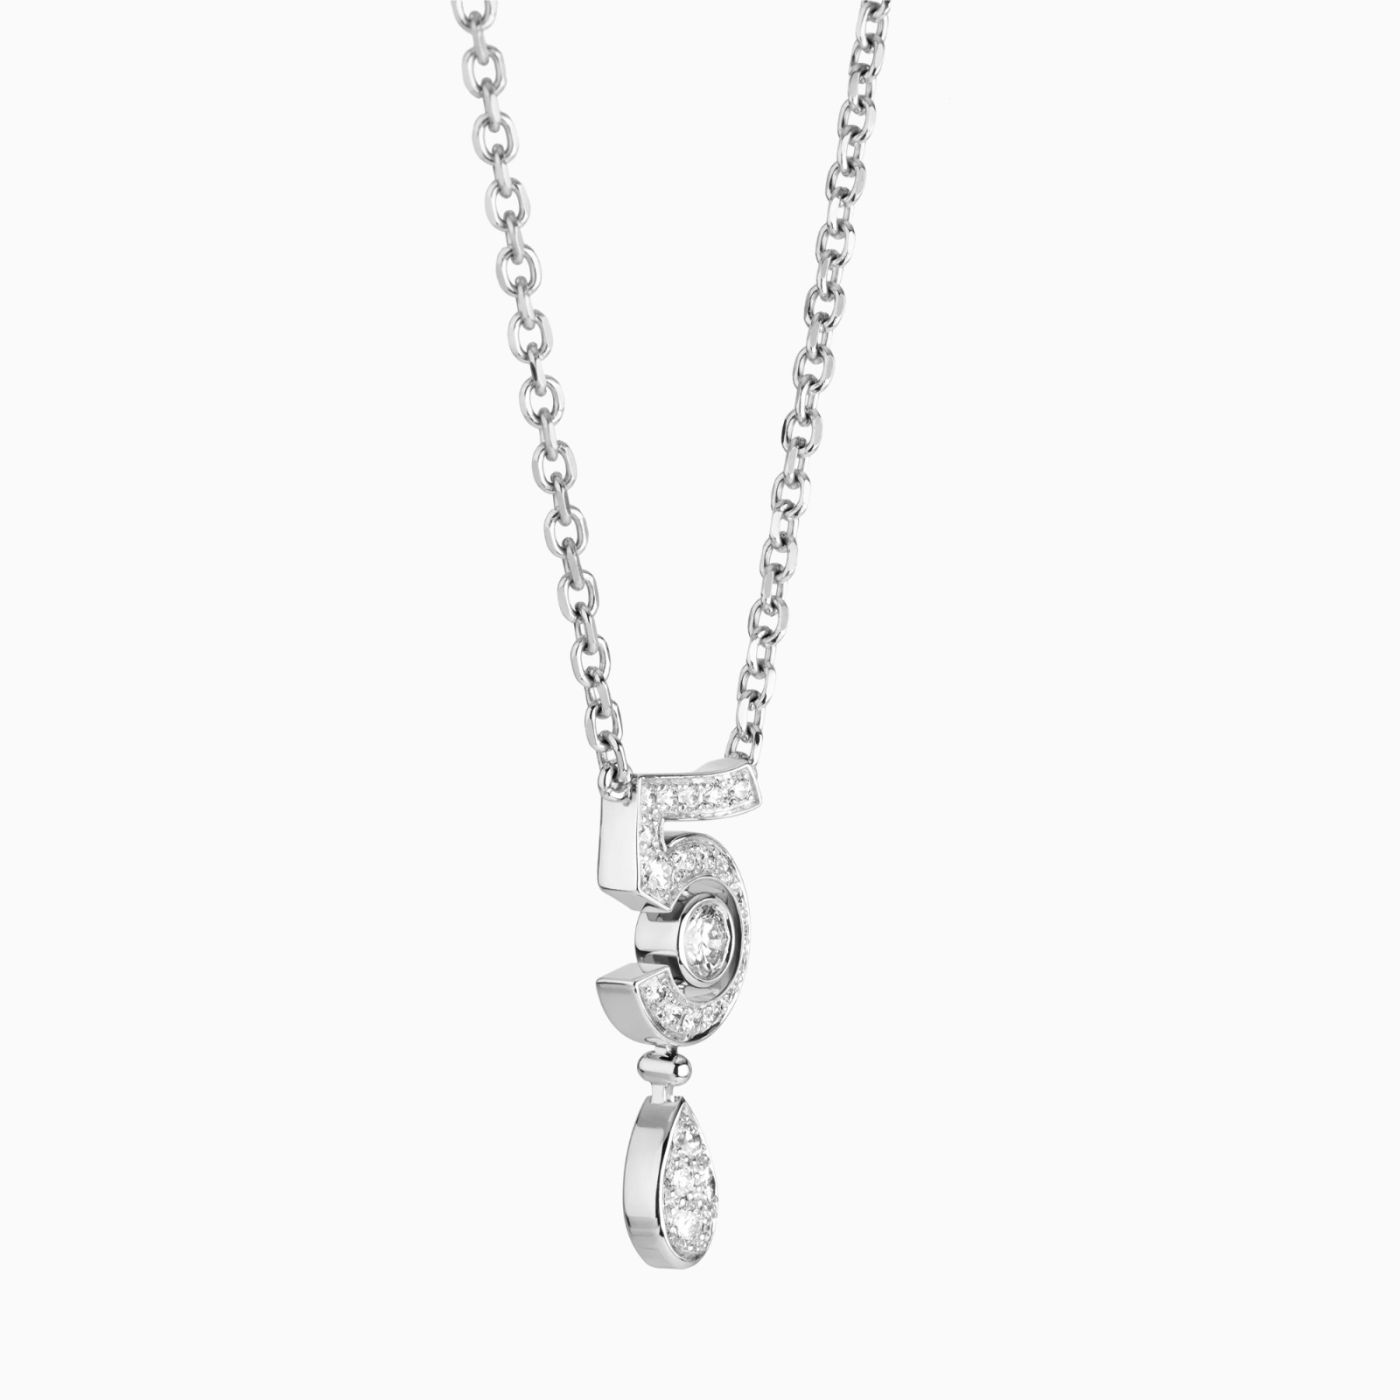 Necklace CHANEL Eternal Nº5 white gold